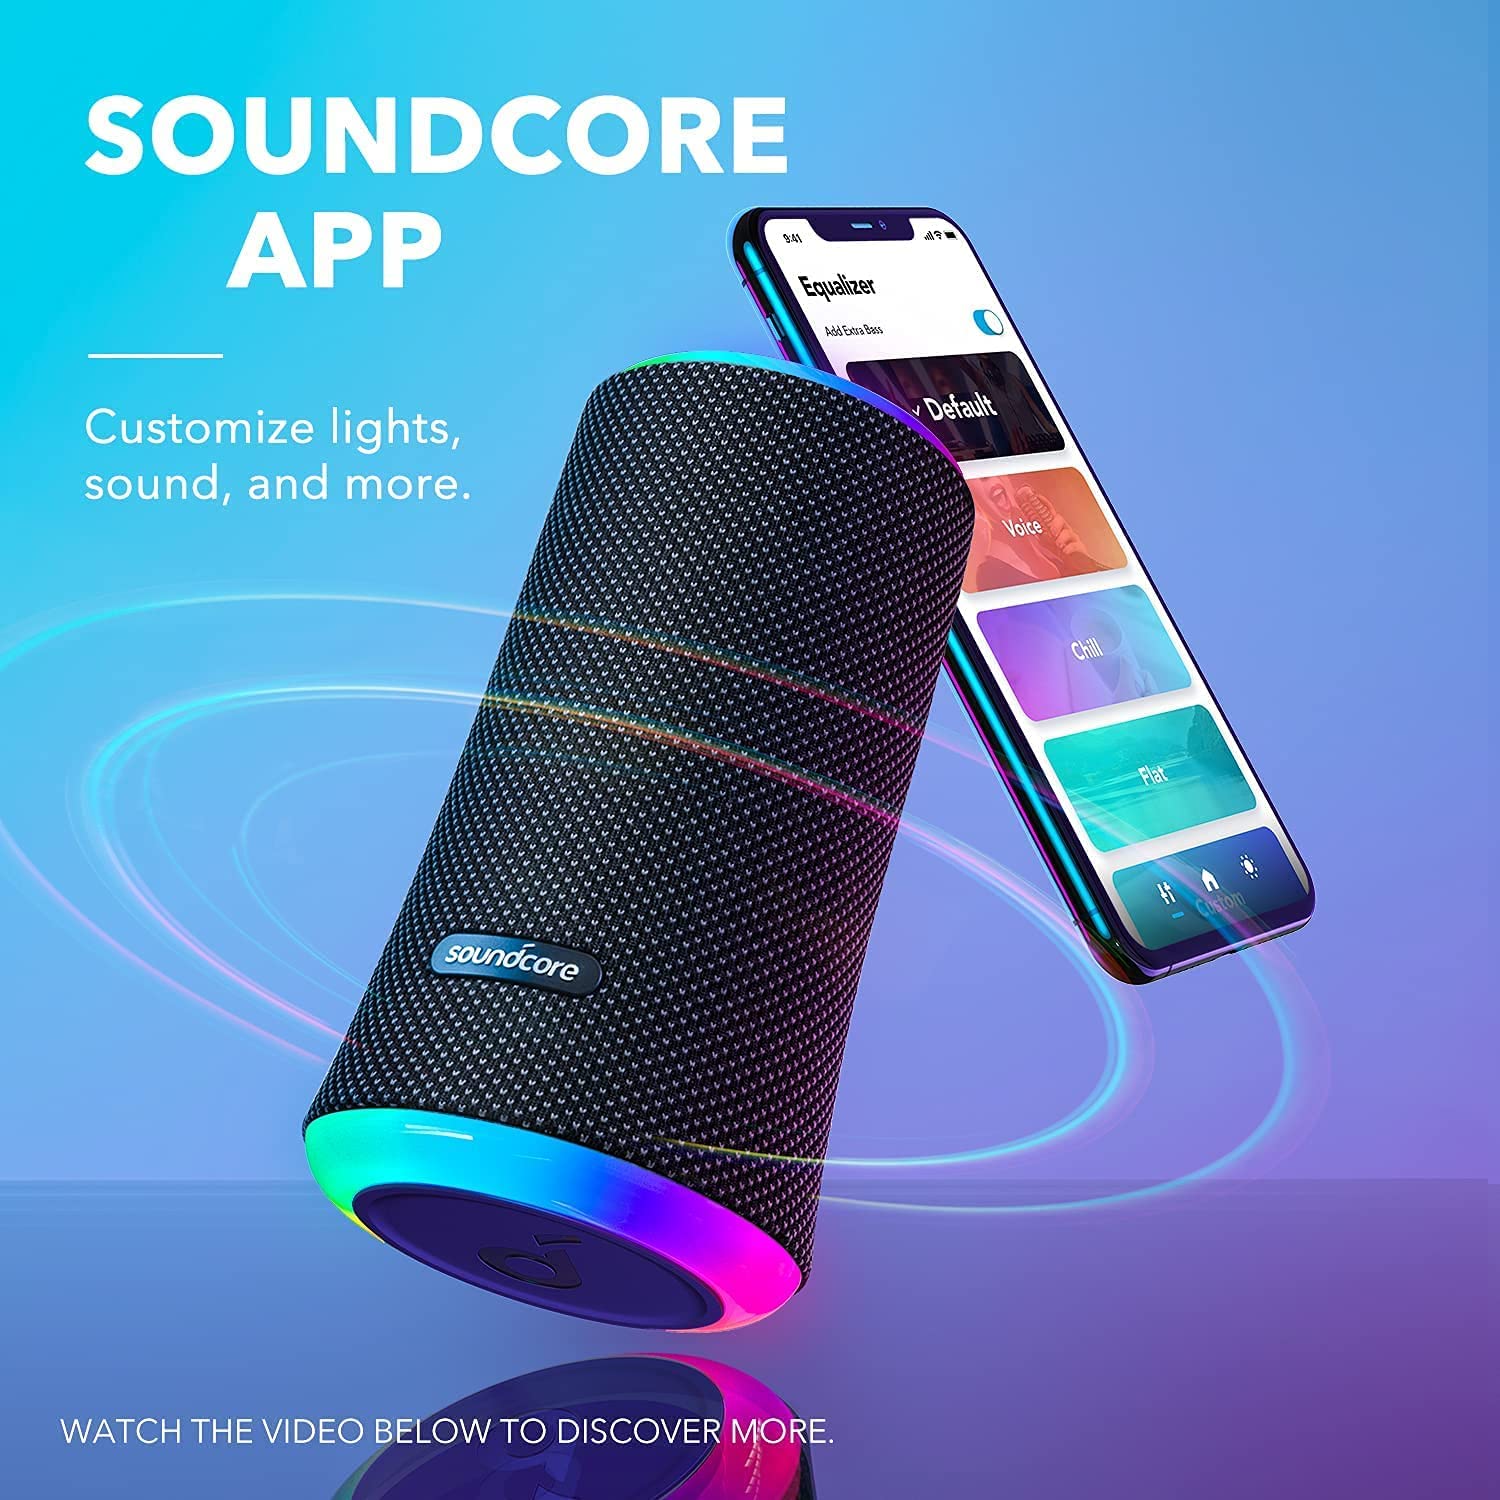 Anker Soundcore Flare 2 Bluetooth Speaker with 360° Sound, PartyCast Technology, Adjustable EQ, 12 Hour Playtime, IPX7 Waterproof Wireless Speaker